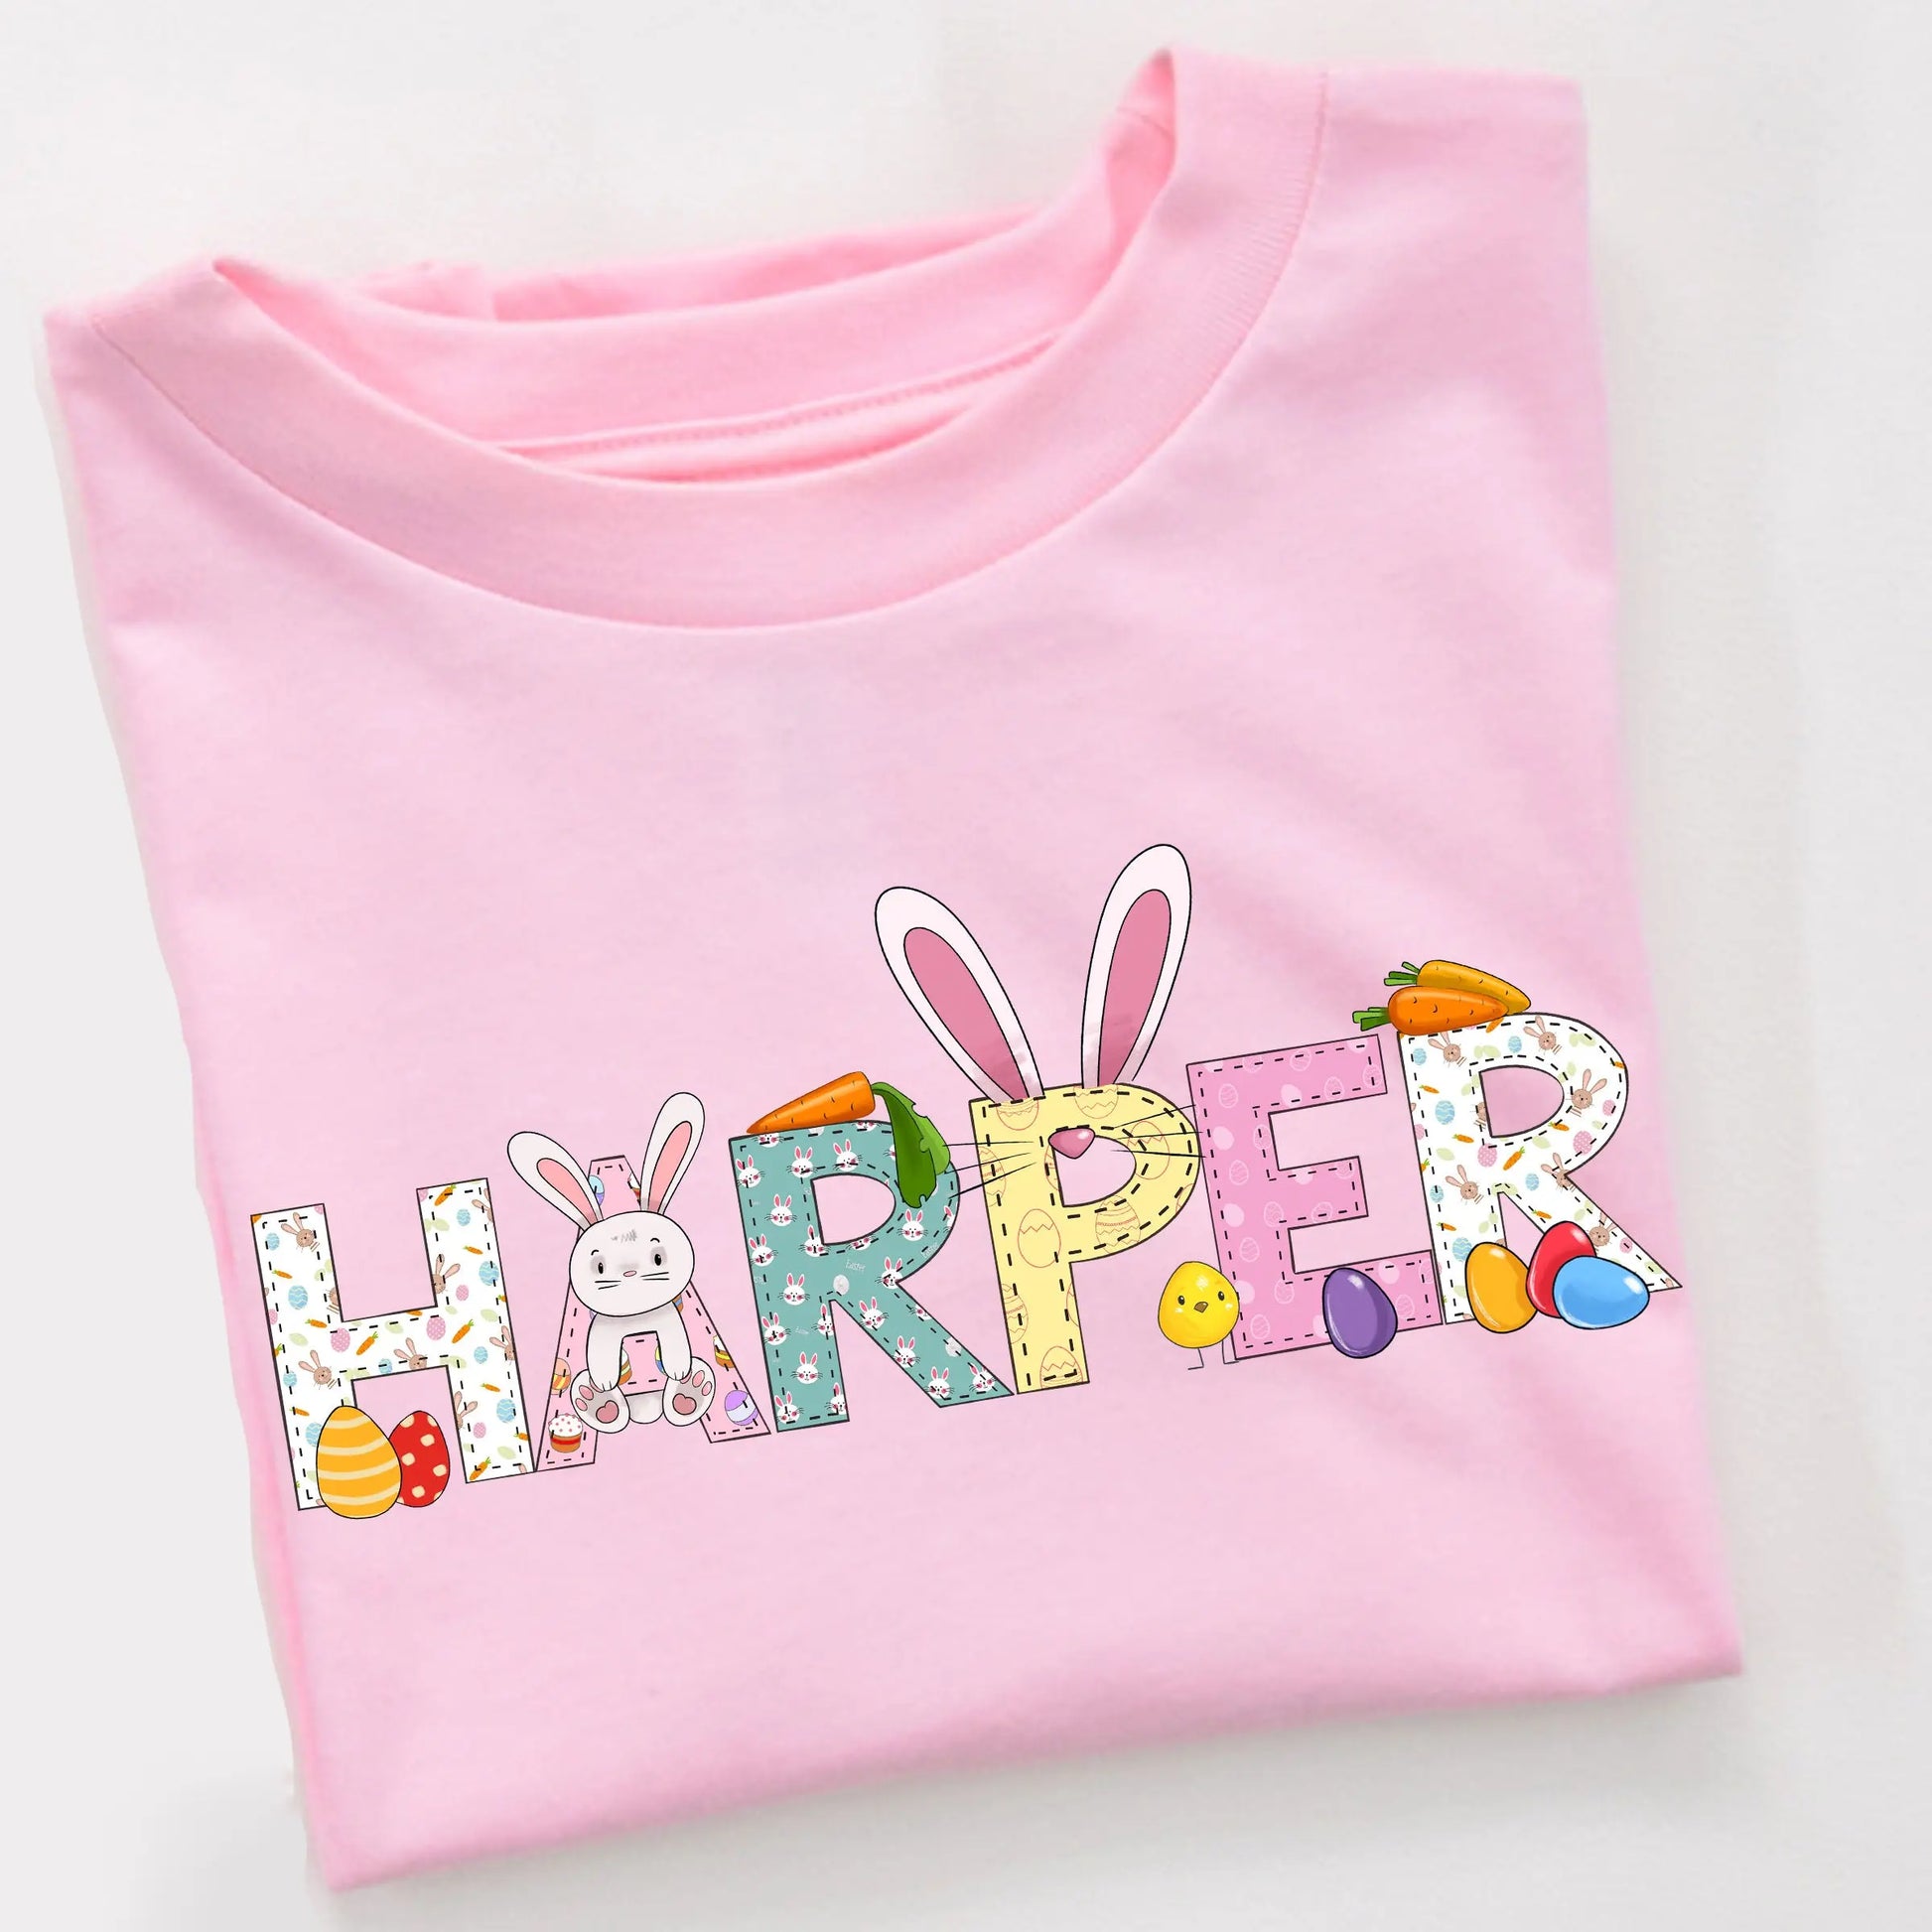 Easter Personalized Toddler Girl Short Sleeve Tee Amazing Faith Designs